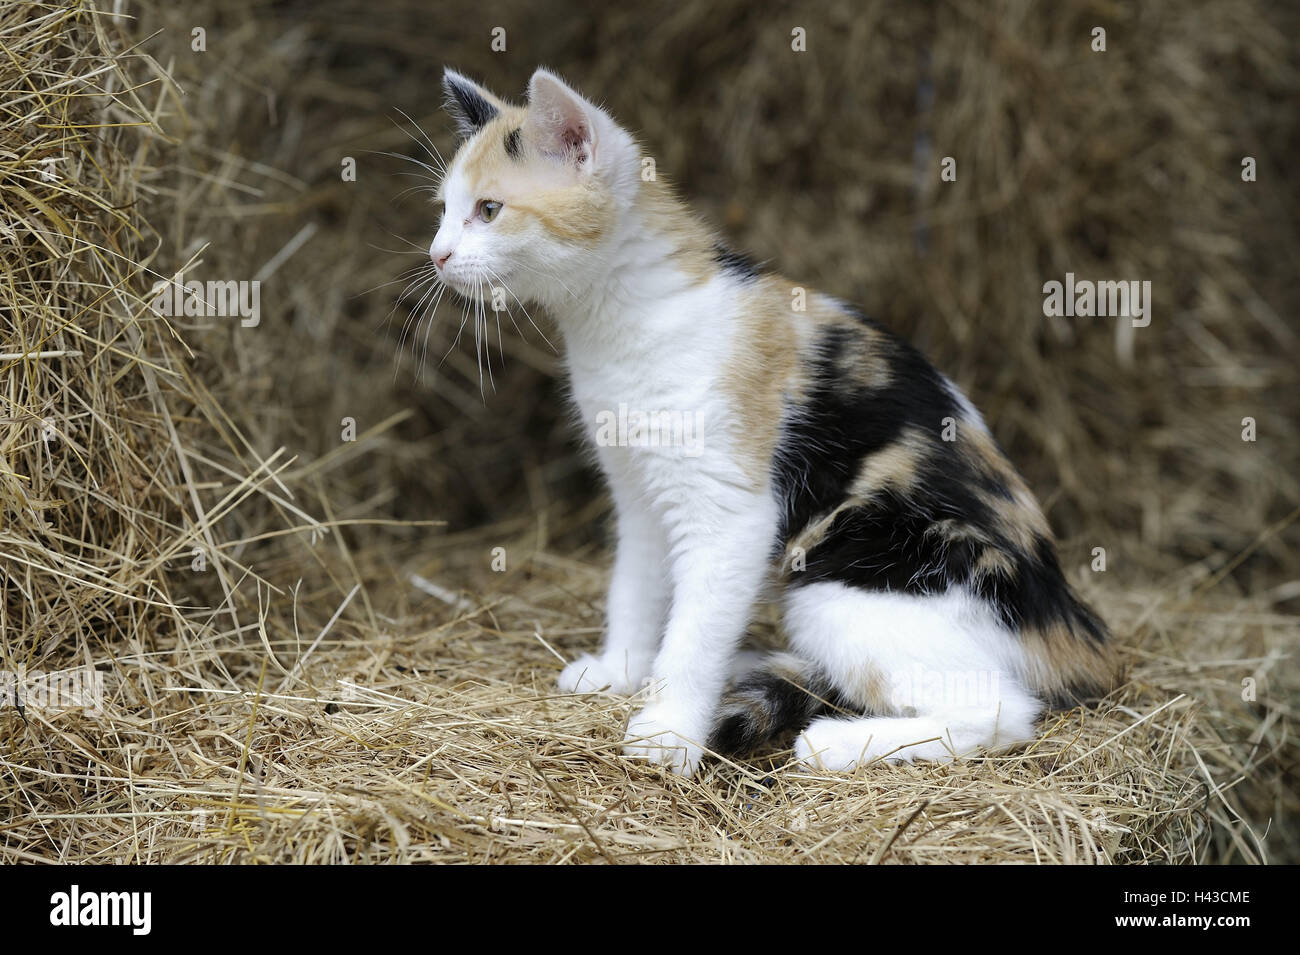 Hay bales, cat, three-coloured, animal, mammal, house cat, pet, outside, attention, side view, sit, Stock Photo